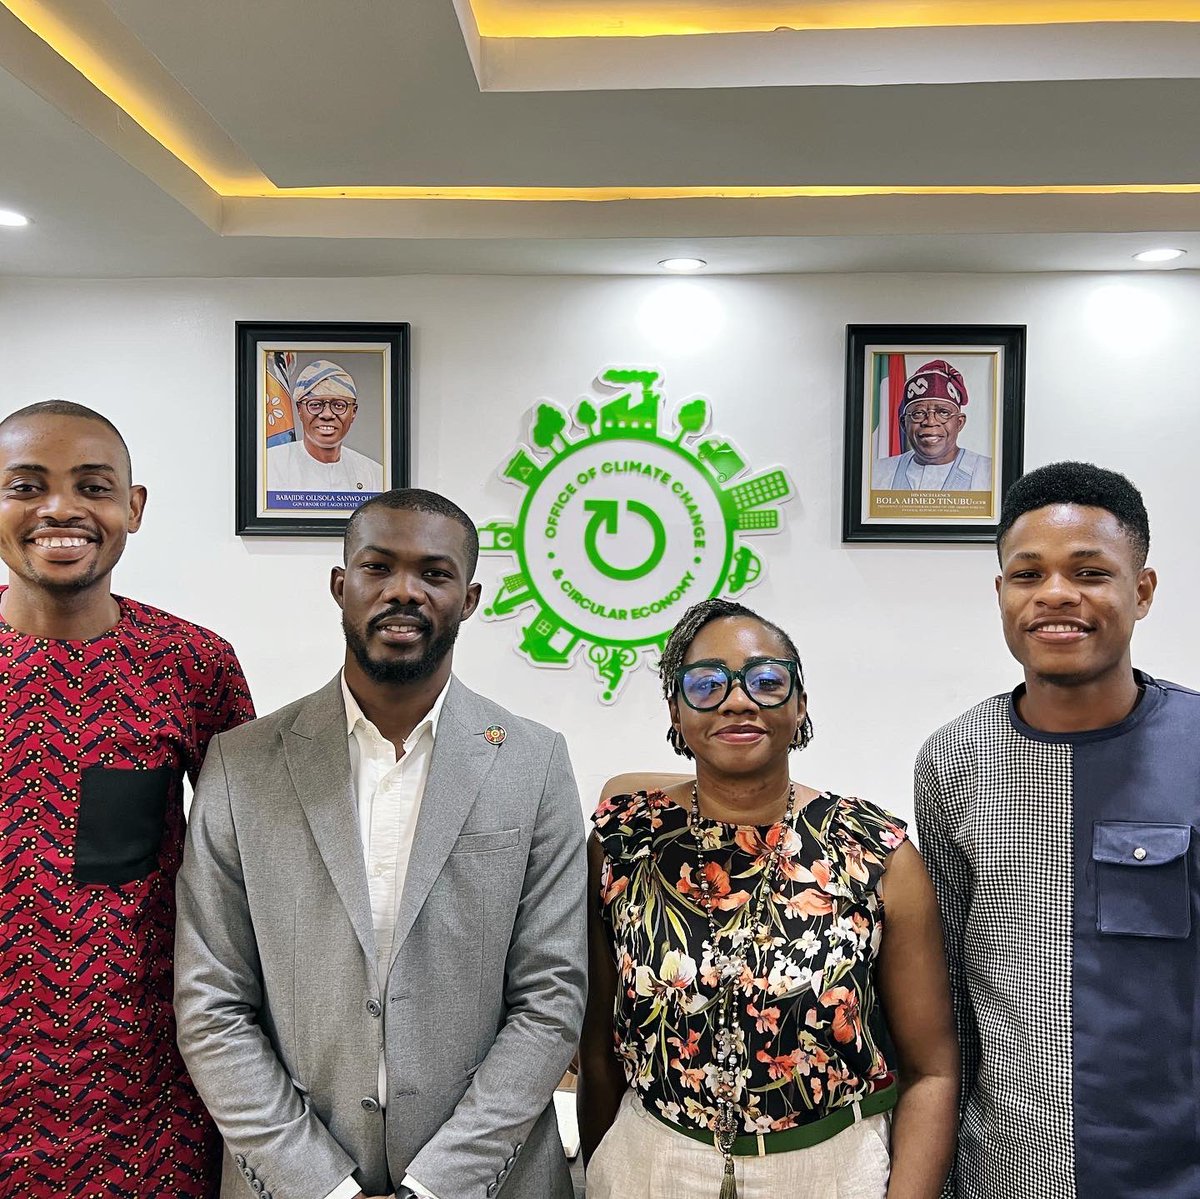 Met Mrs. Titi Oshodi, Senior Special Adviser to the Lagos State Governor on Climate Change and Circular Economy. Discussed #CoolCycle Project's value for Sustainable Agriculture, Renewable Energy, Circular Economy. Excited to collaborate further, starting with Epe pilot. #TDB